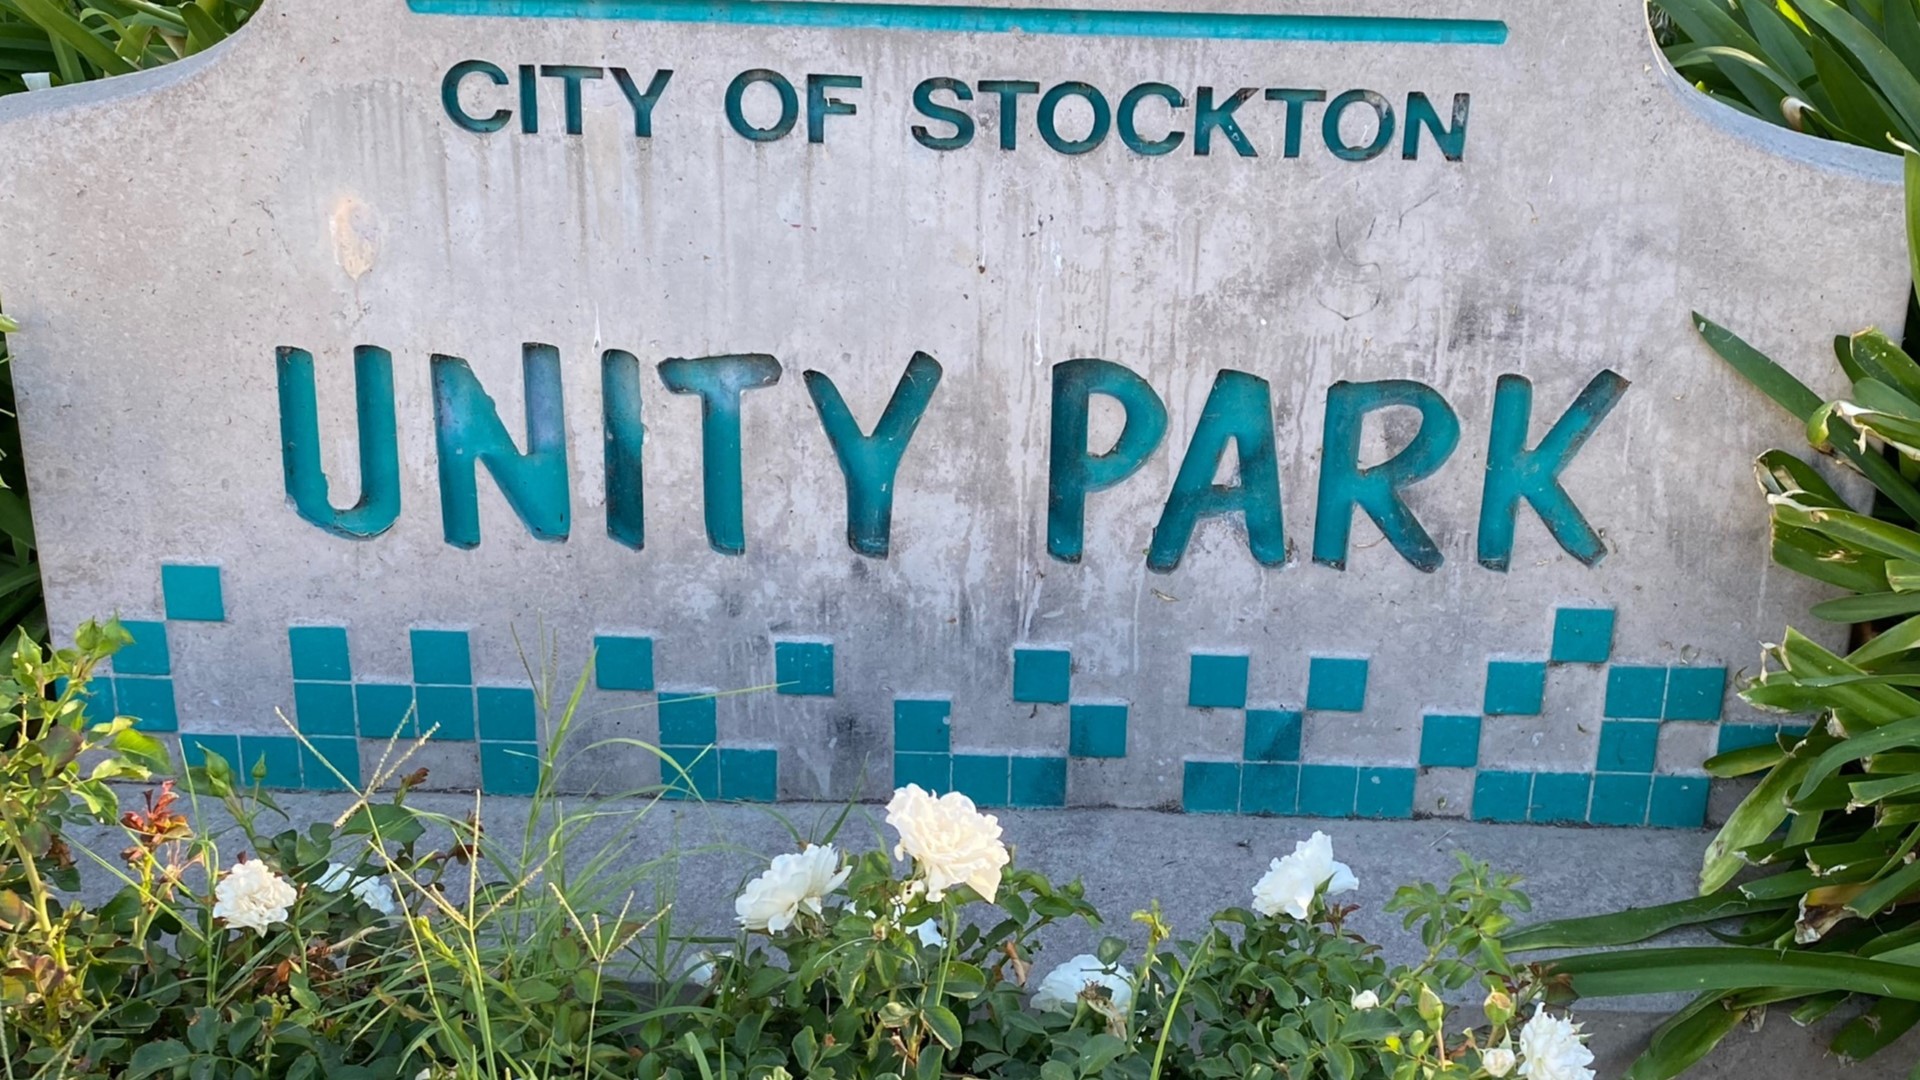 The stabbing in Stockton happened at Unity Park near Chavez High School. 1 student was stabbed and another was injured in a fight.